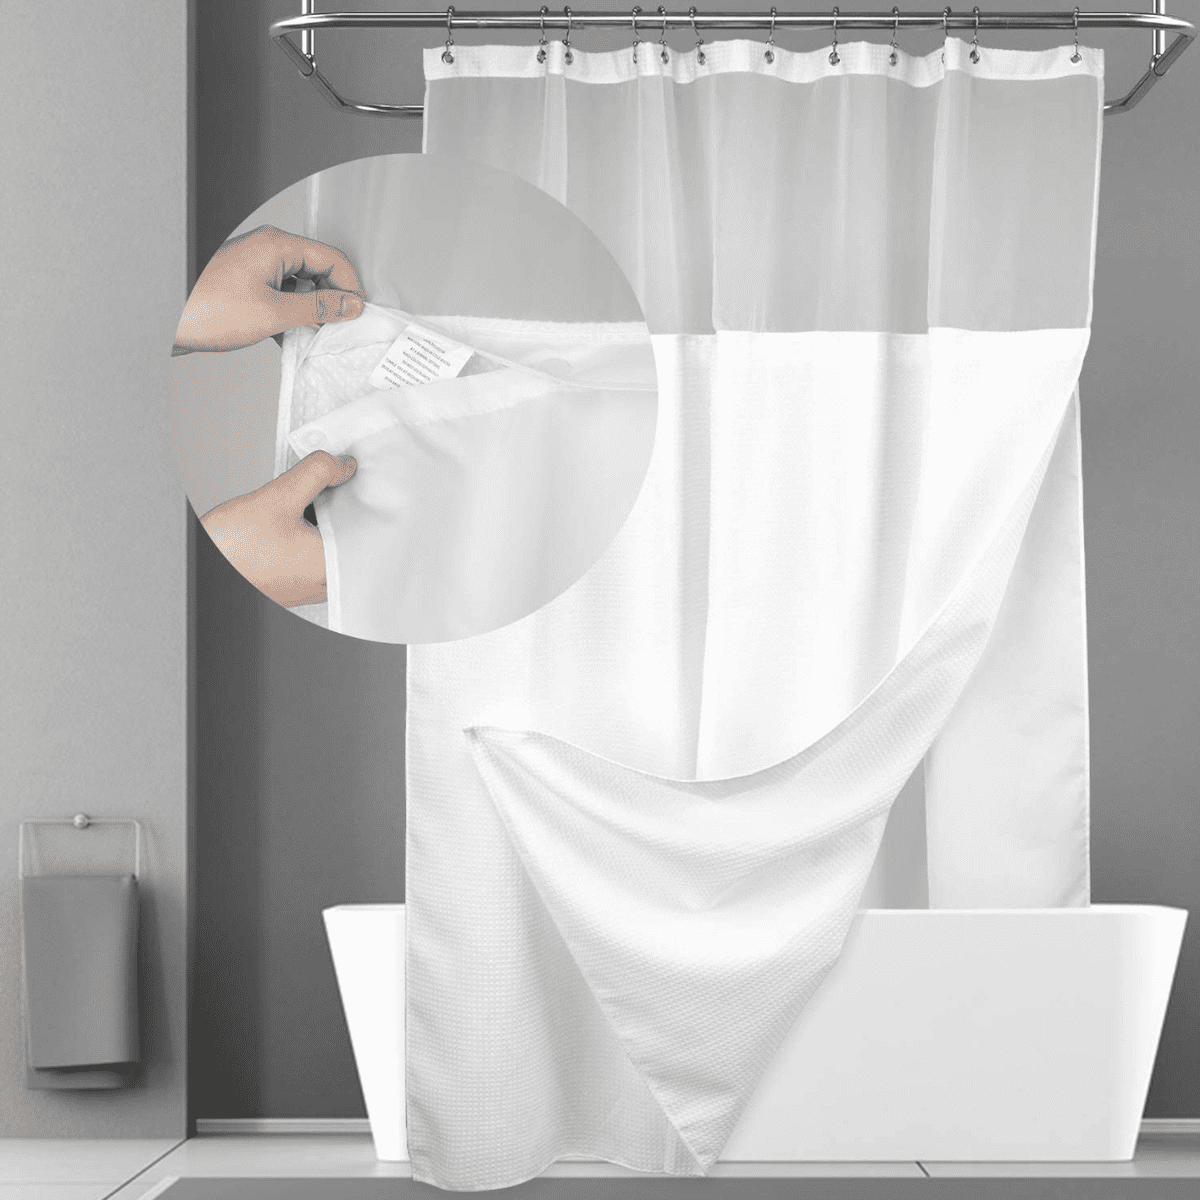 Why I Love the N&Y Home Shower Curtain with Snap-In Liner: Tried & Tested